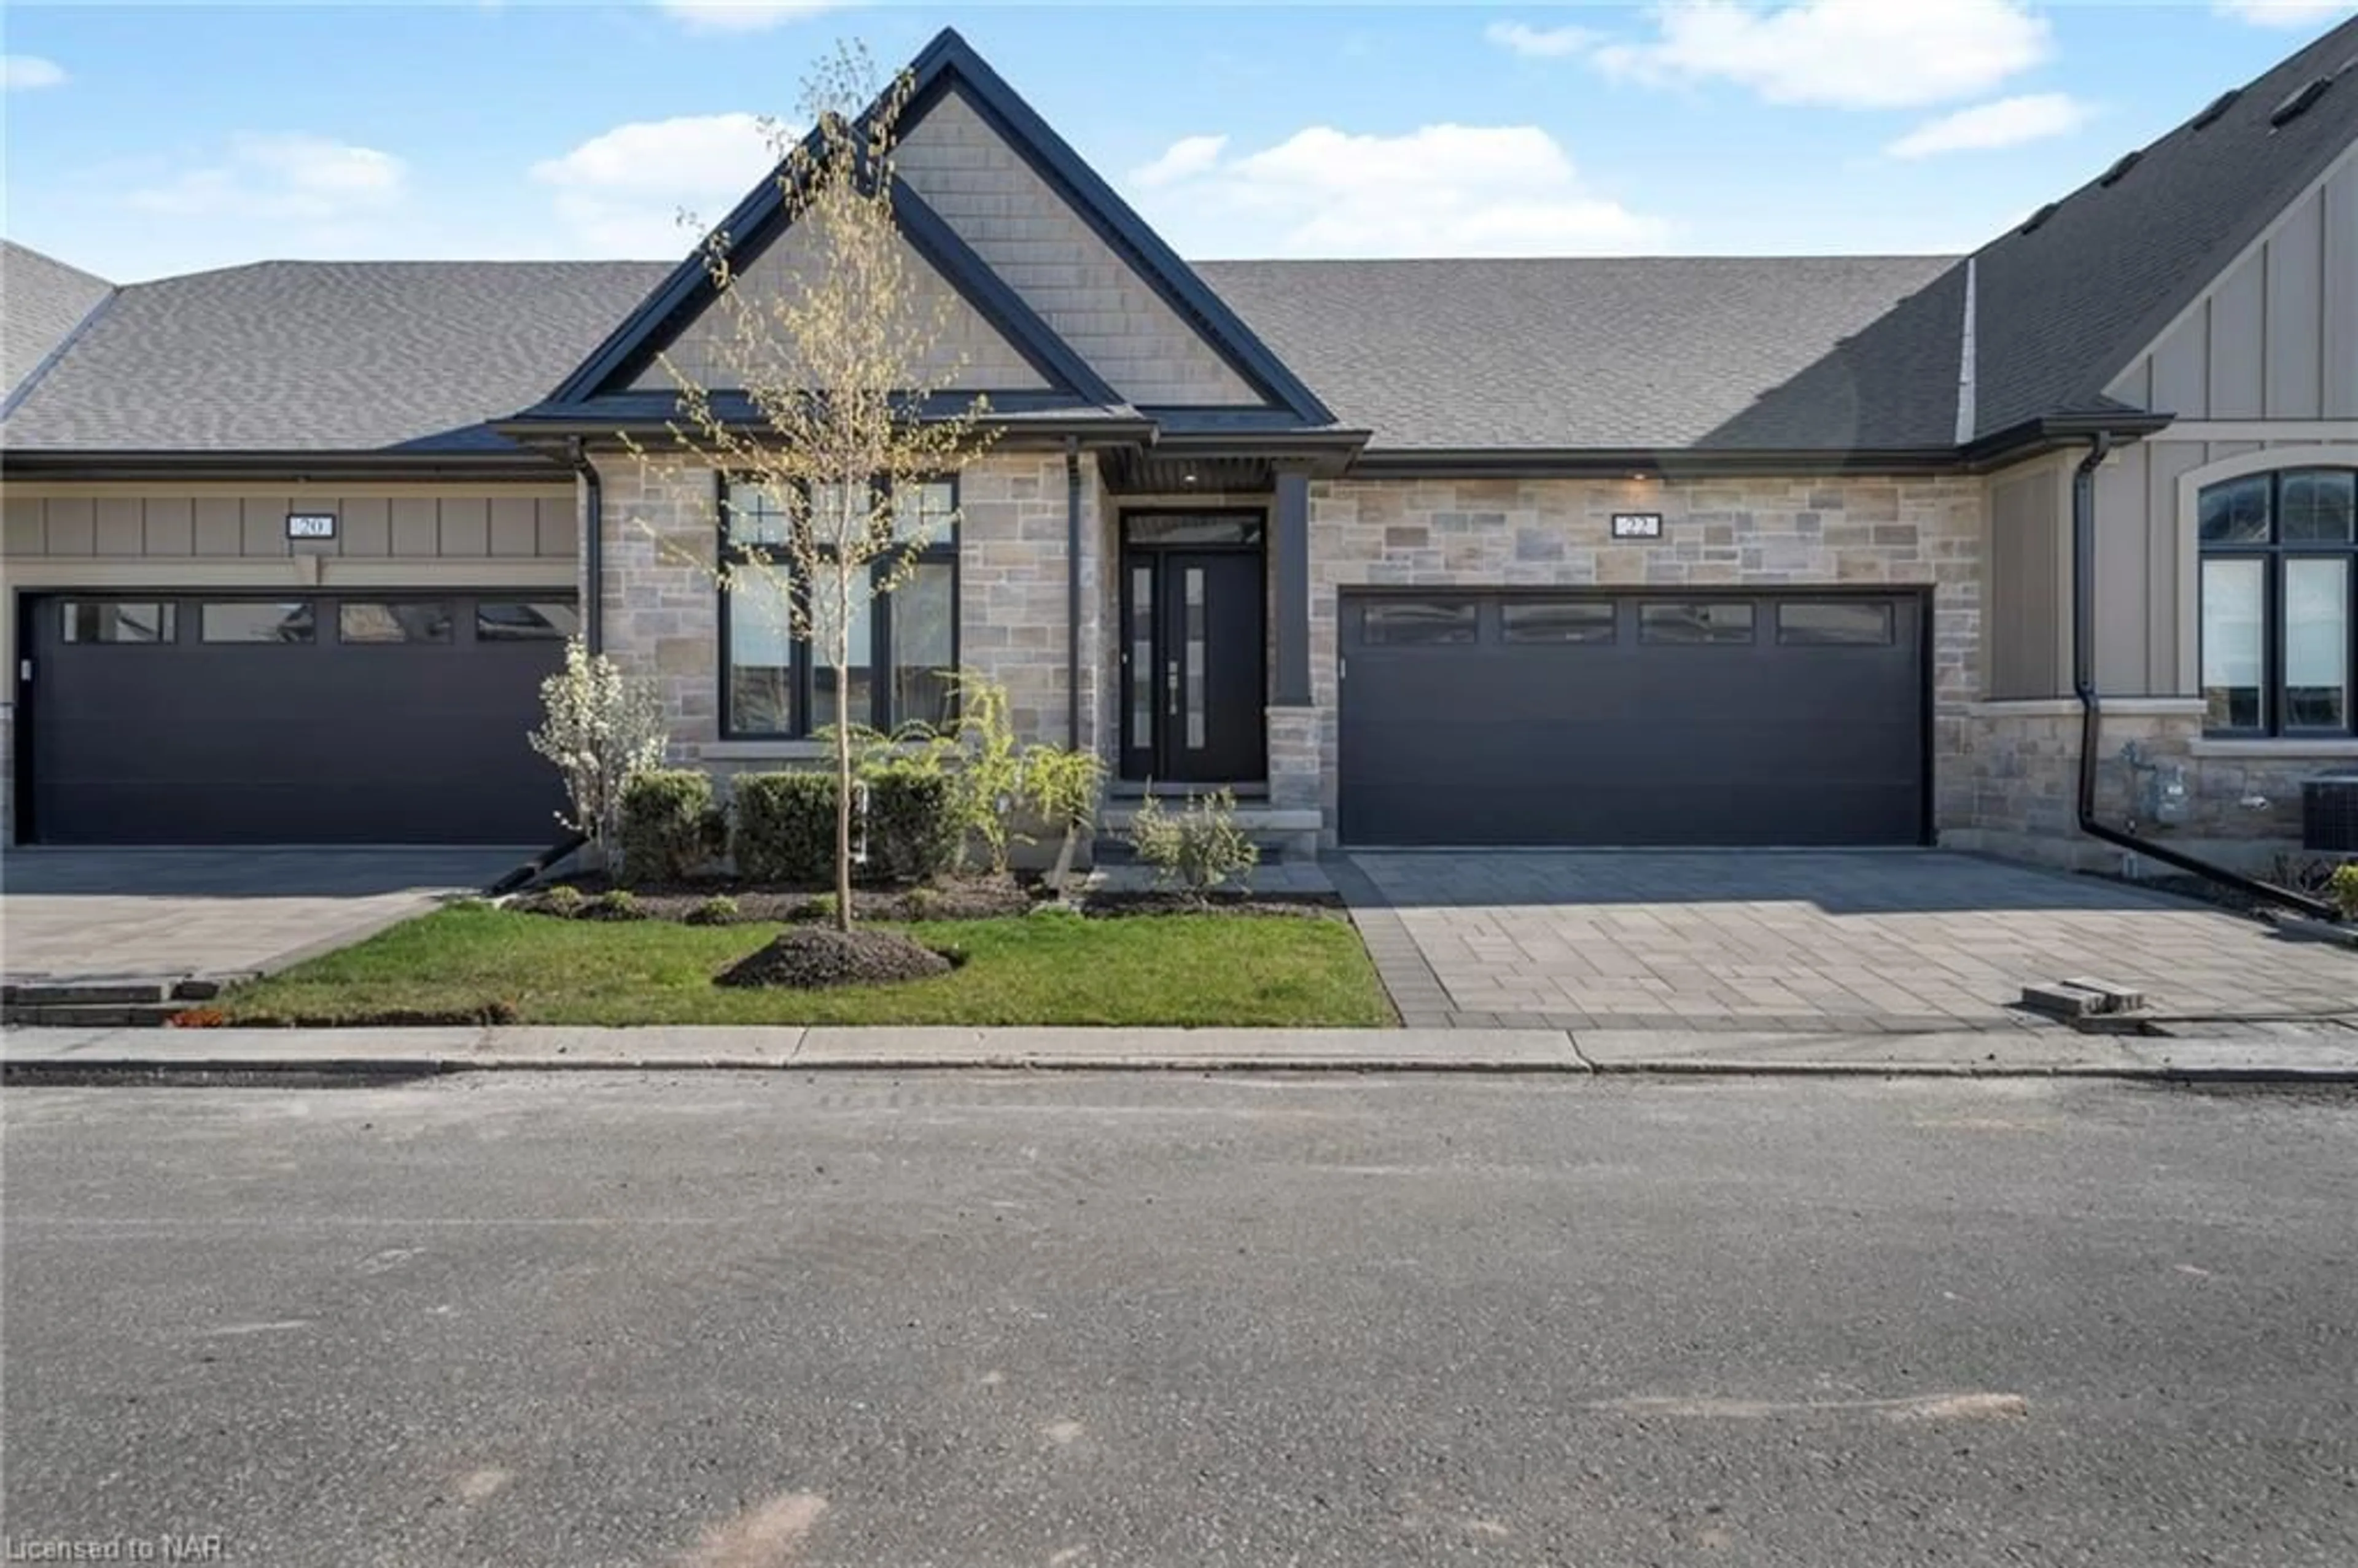 Home with brick exterior material for 154 Port Robinson Rd #22, Fonthill Ontario L0S 1E6